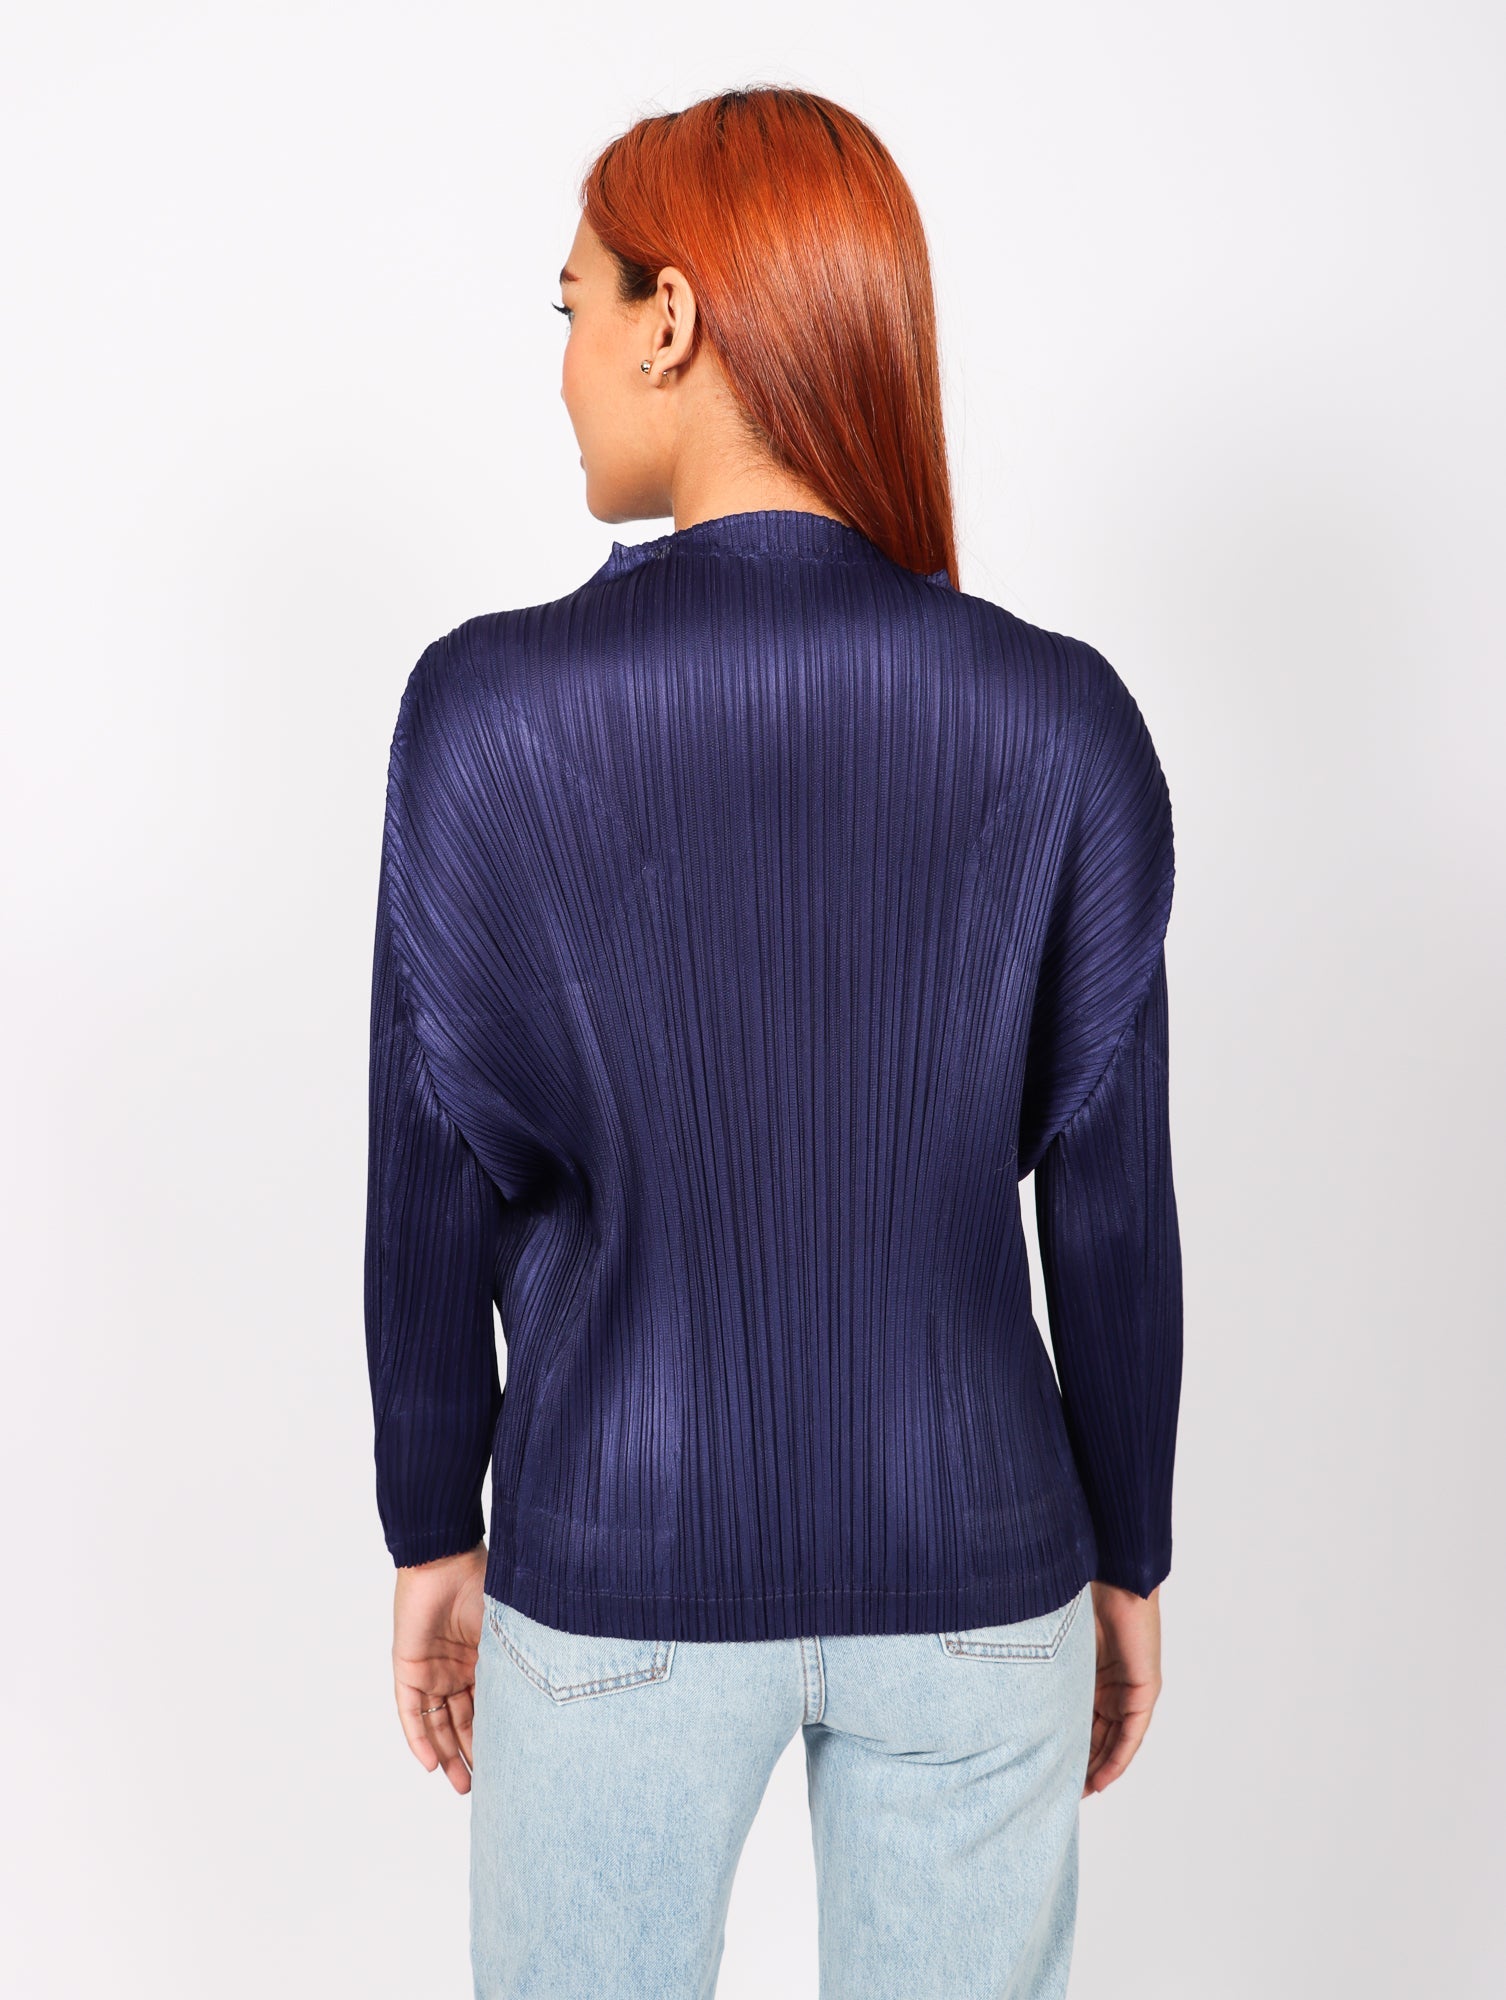 Trunk Top in Navy by Pleats Please Issey Miyake